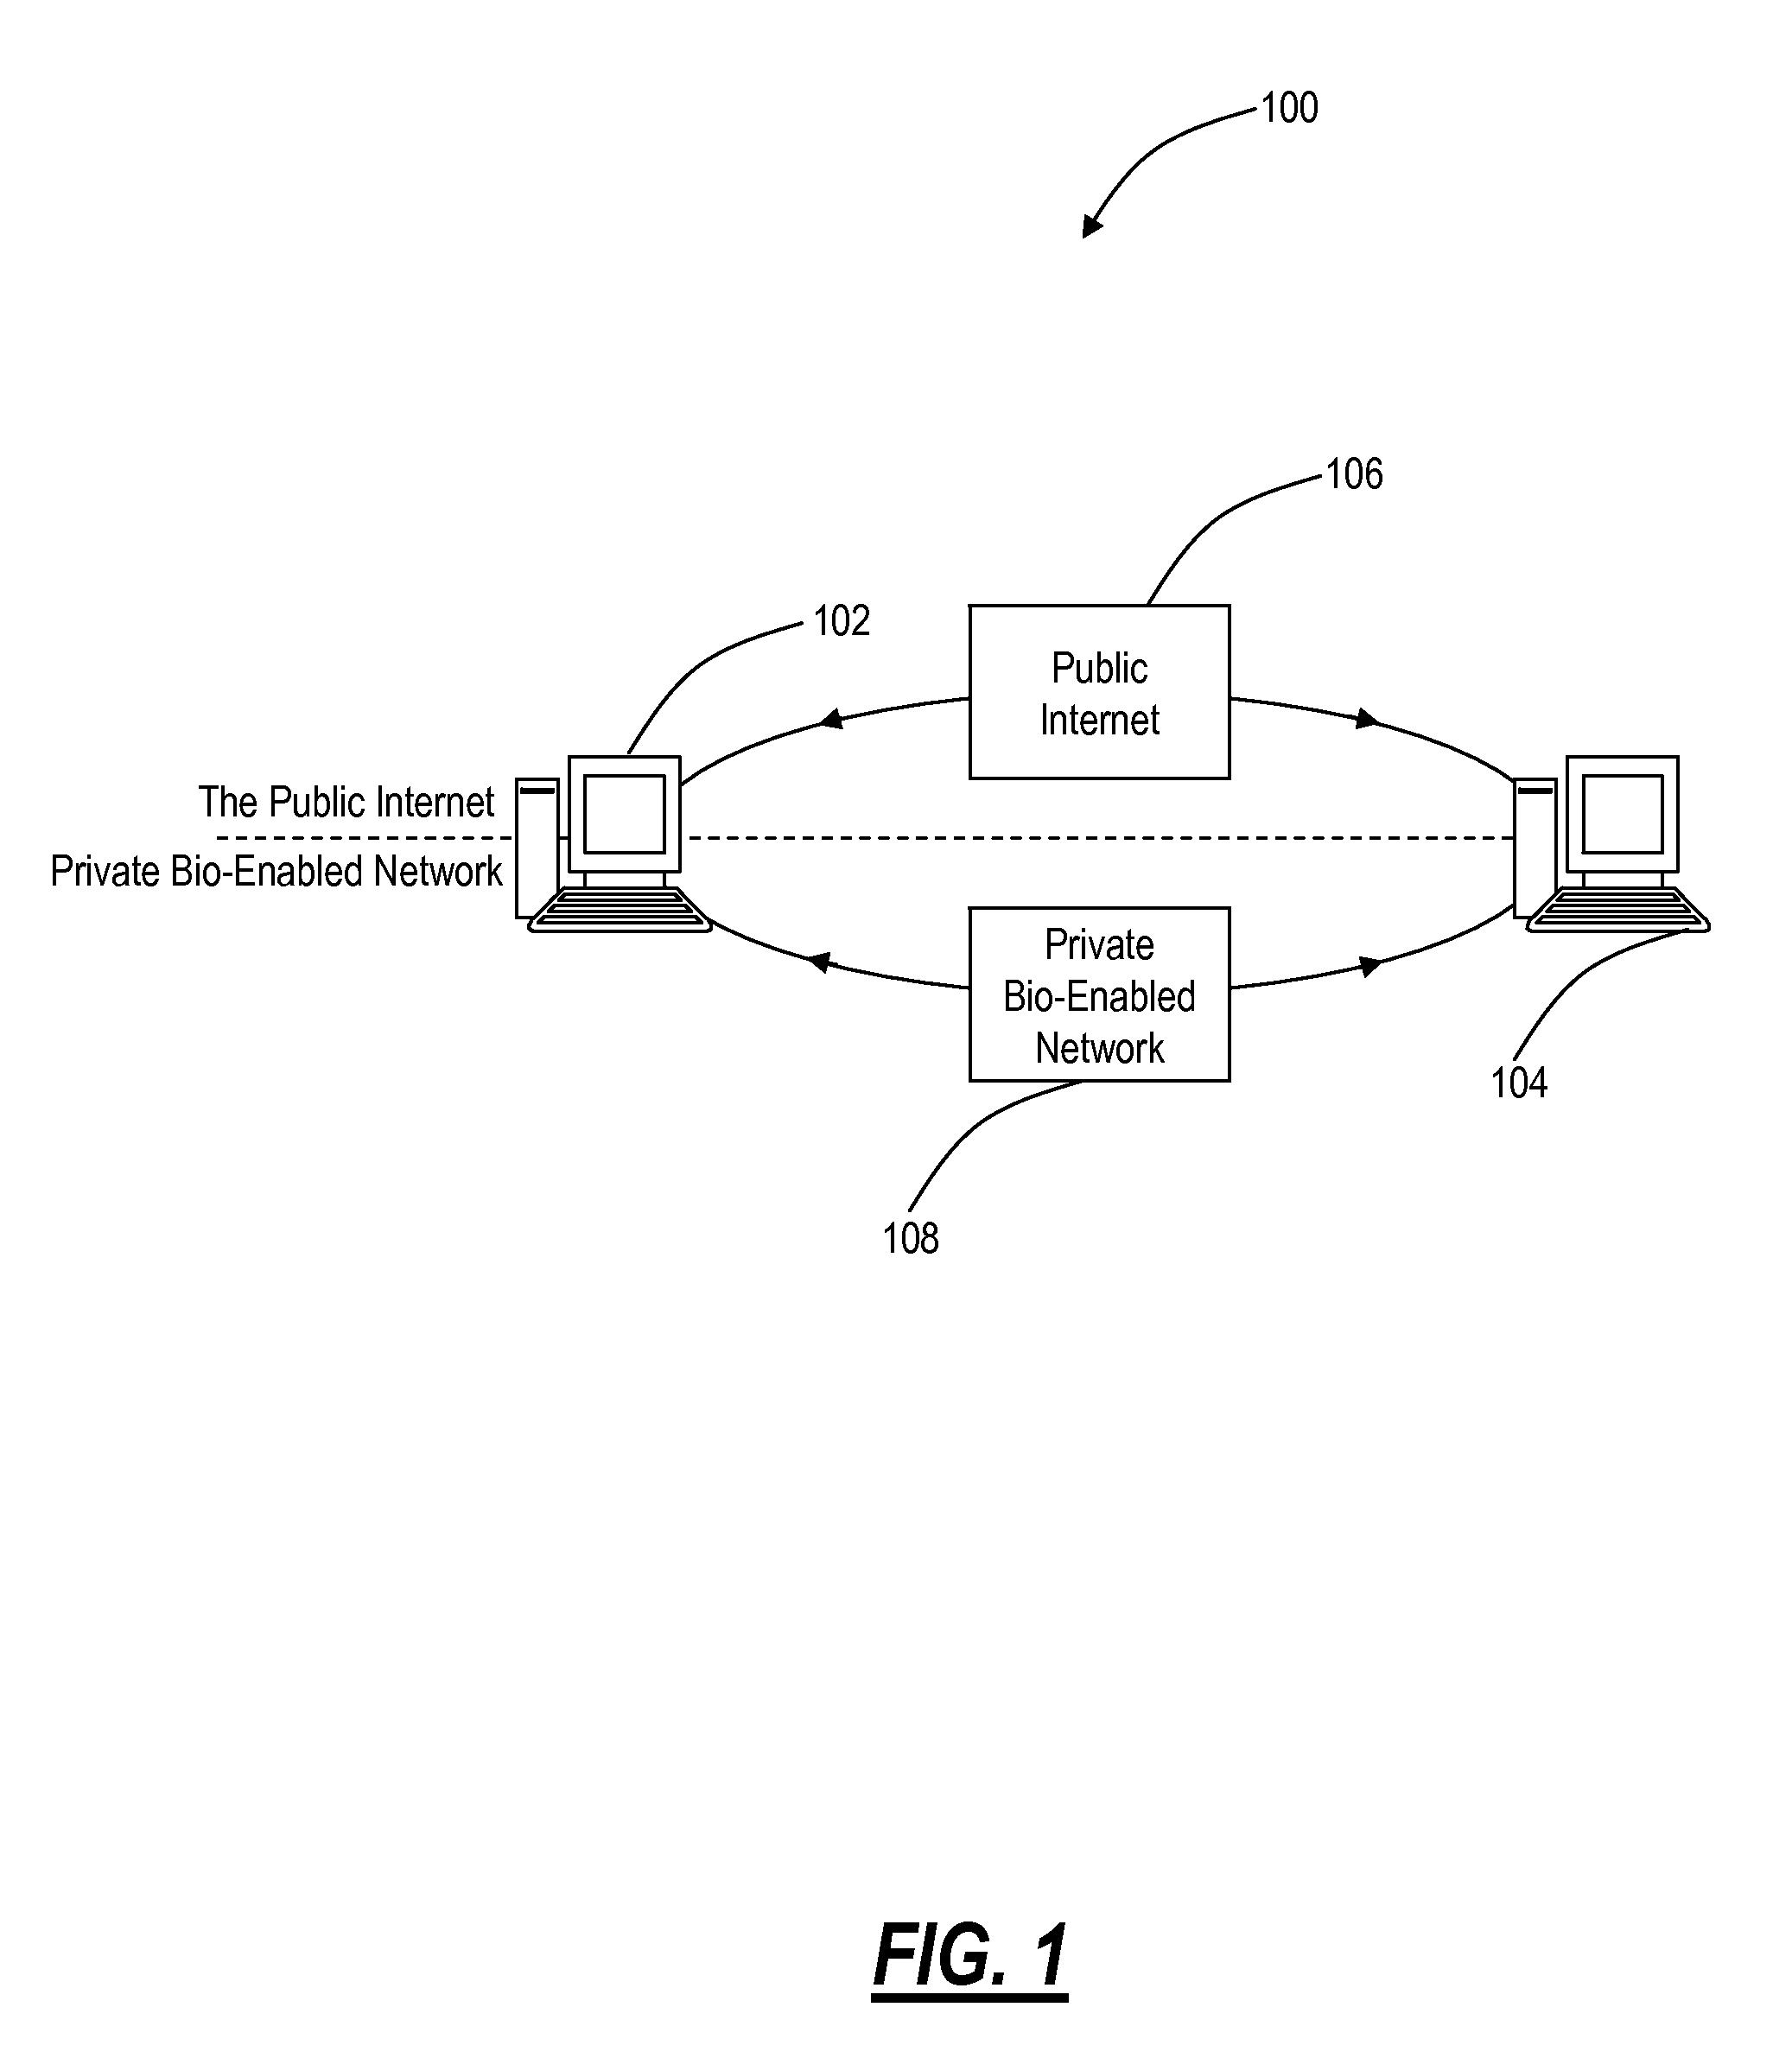 Systems and methods for secure and certified electronic messaging